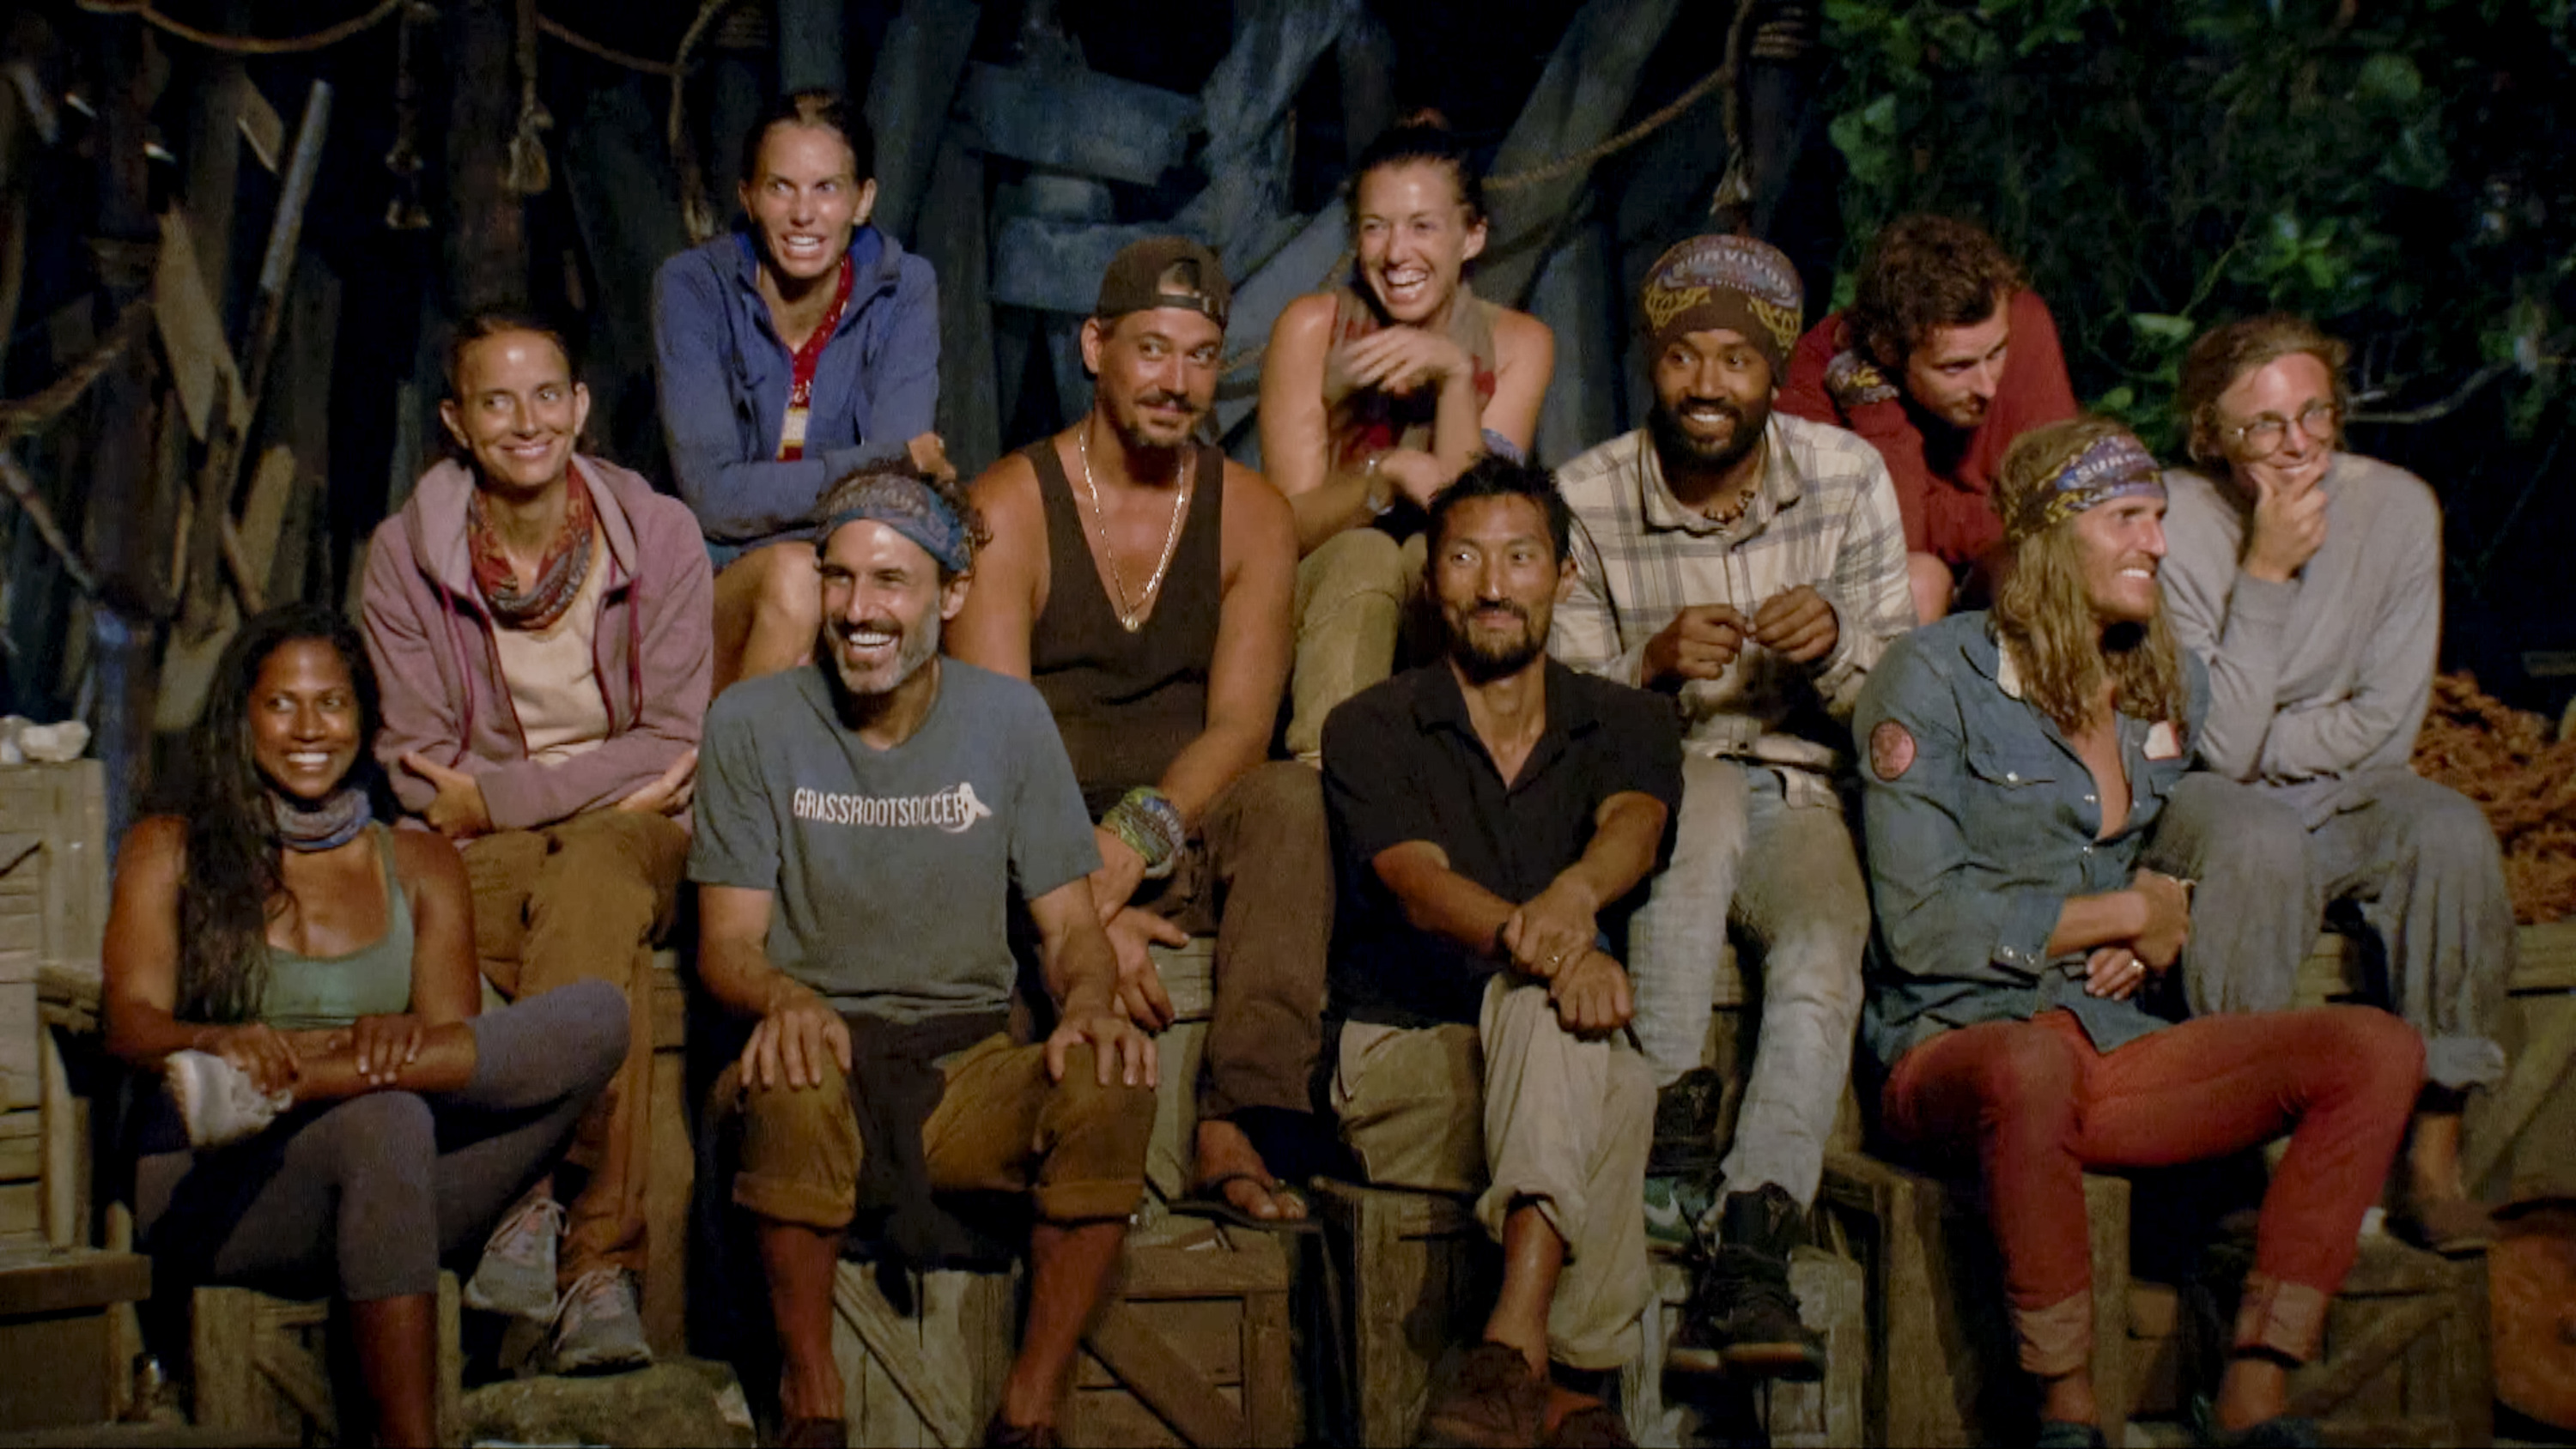 Natalie Anderson, Amber Brkich Mariano, Ben Driebergen, Ethan Zohn, Boston Rob Mariano, Parvati Shallow, Yul Kwon, Wendell Holland, Adam Klein, Tyson Apostol and Sophie Clarke at Tribal Council on the Twelfth episode of Survivor: Winners at War